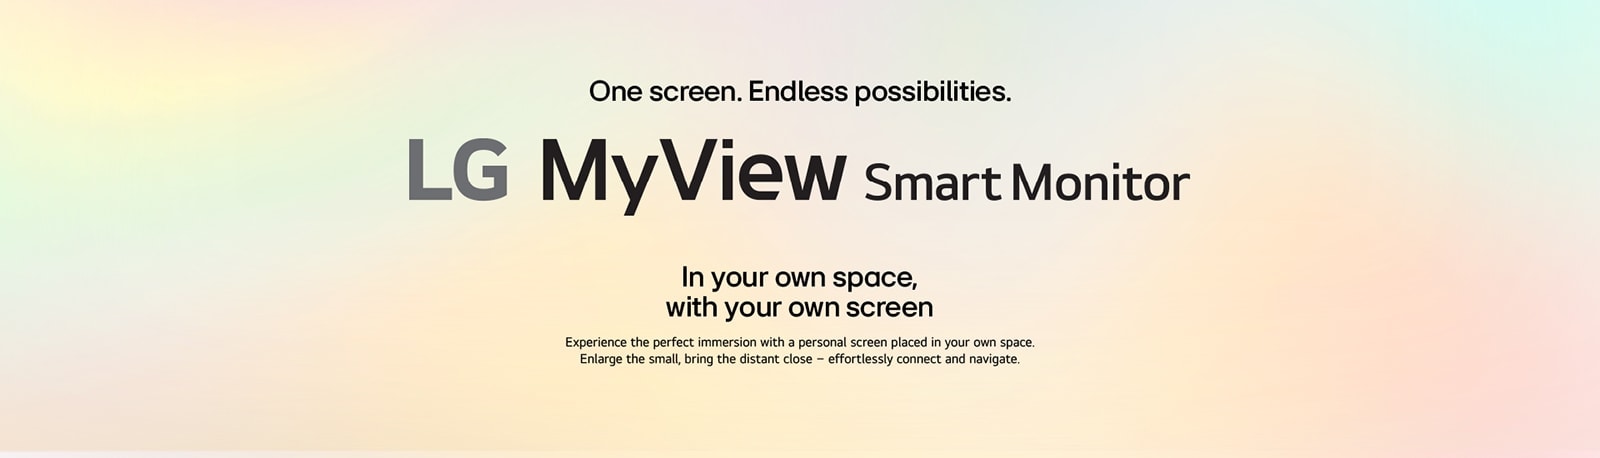 LG MyView Smart Monitor - In your own space, with your own screen.	